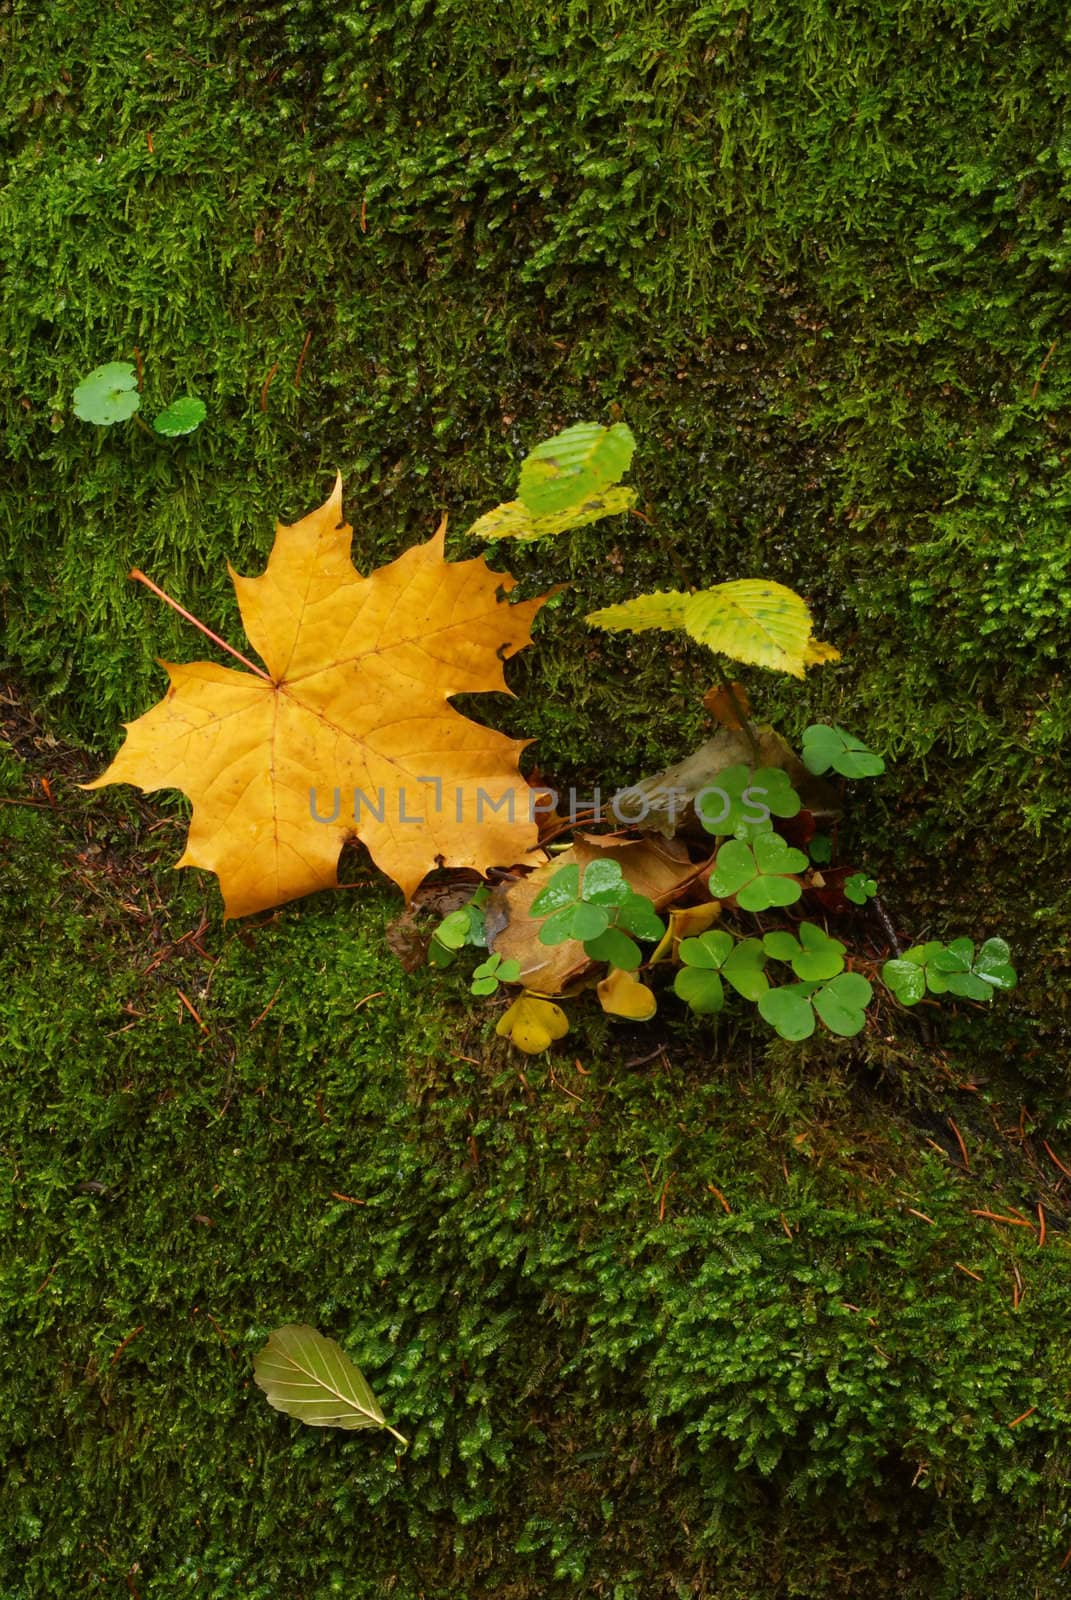 The stone covered by a moss with the fallen yellow maple leaf